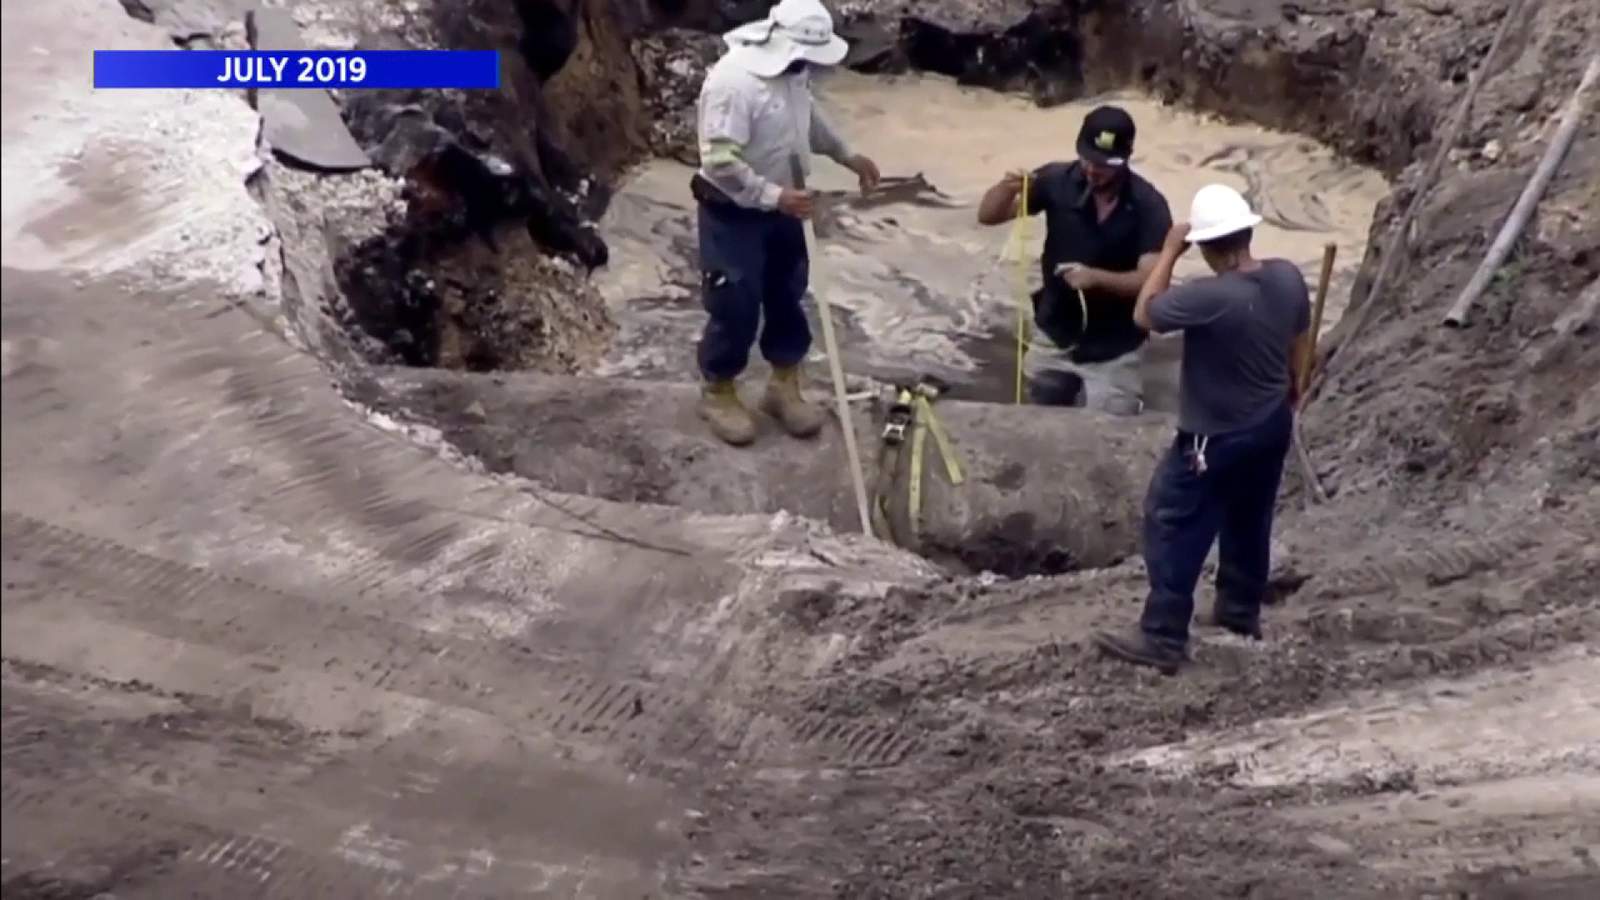 ‘Extraordinary’ class action lawsuit takes on FPL over Fort Lauderdale water main break